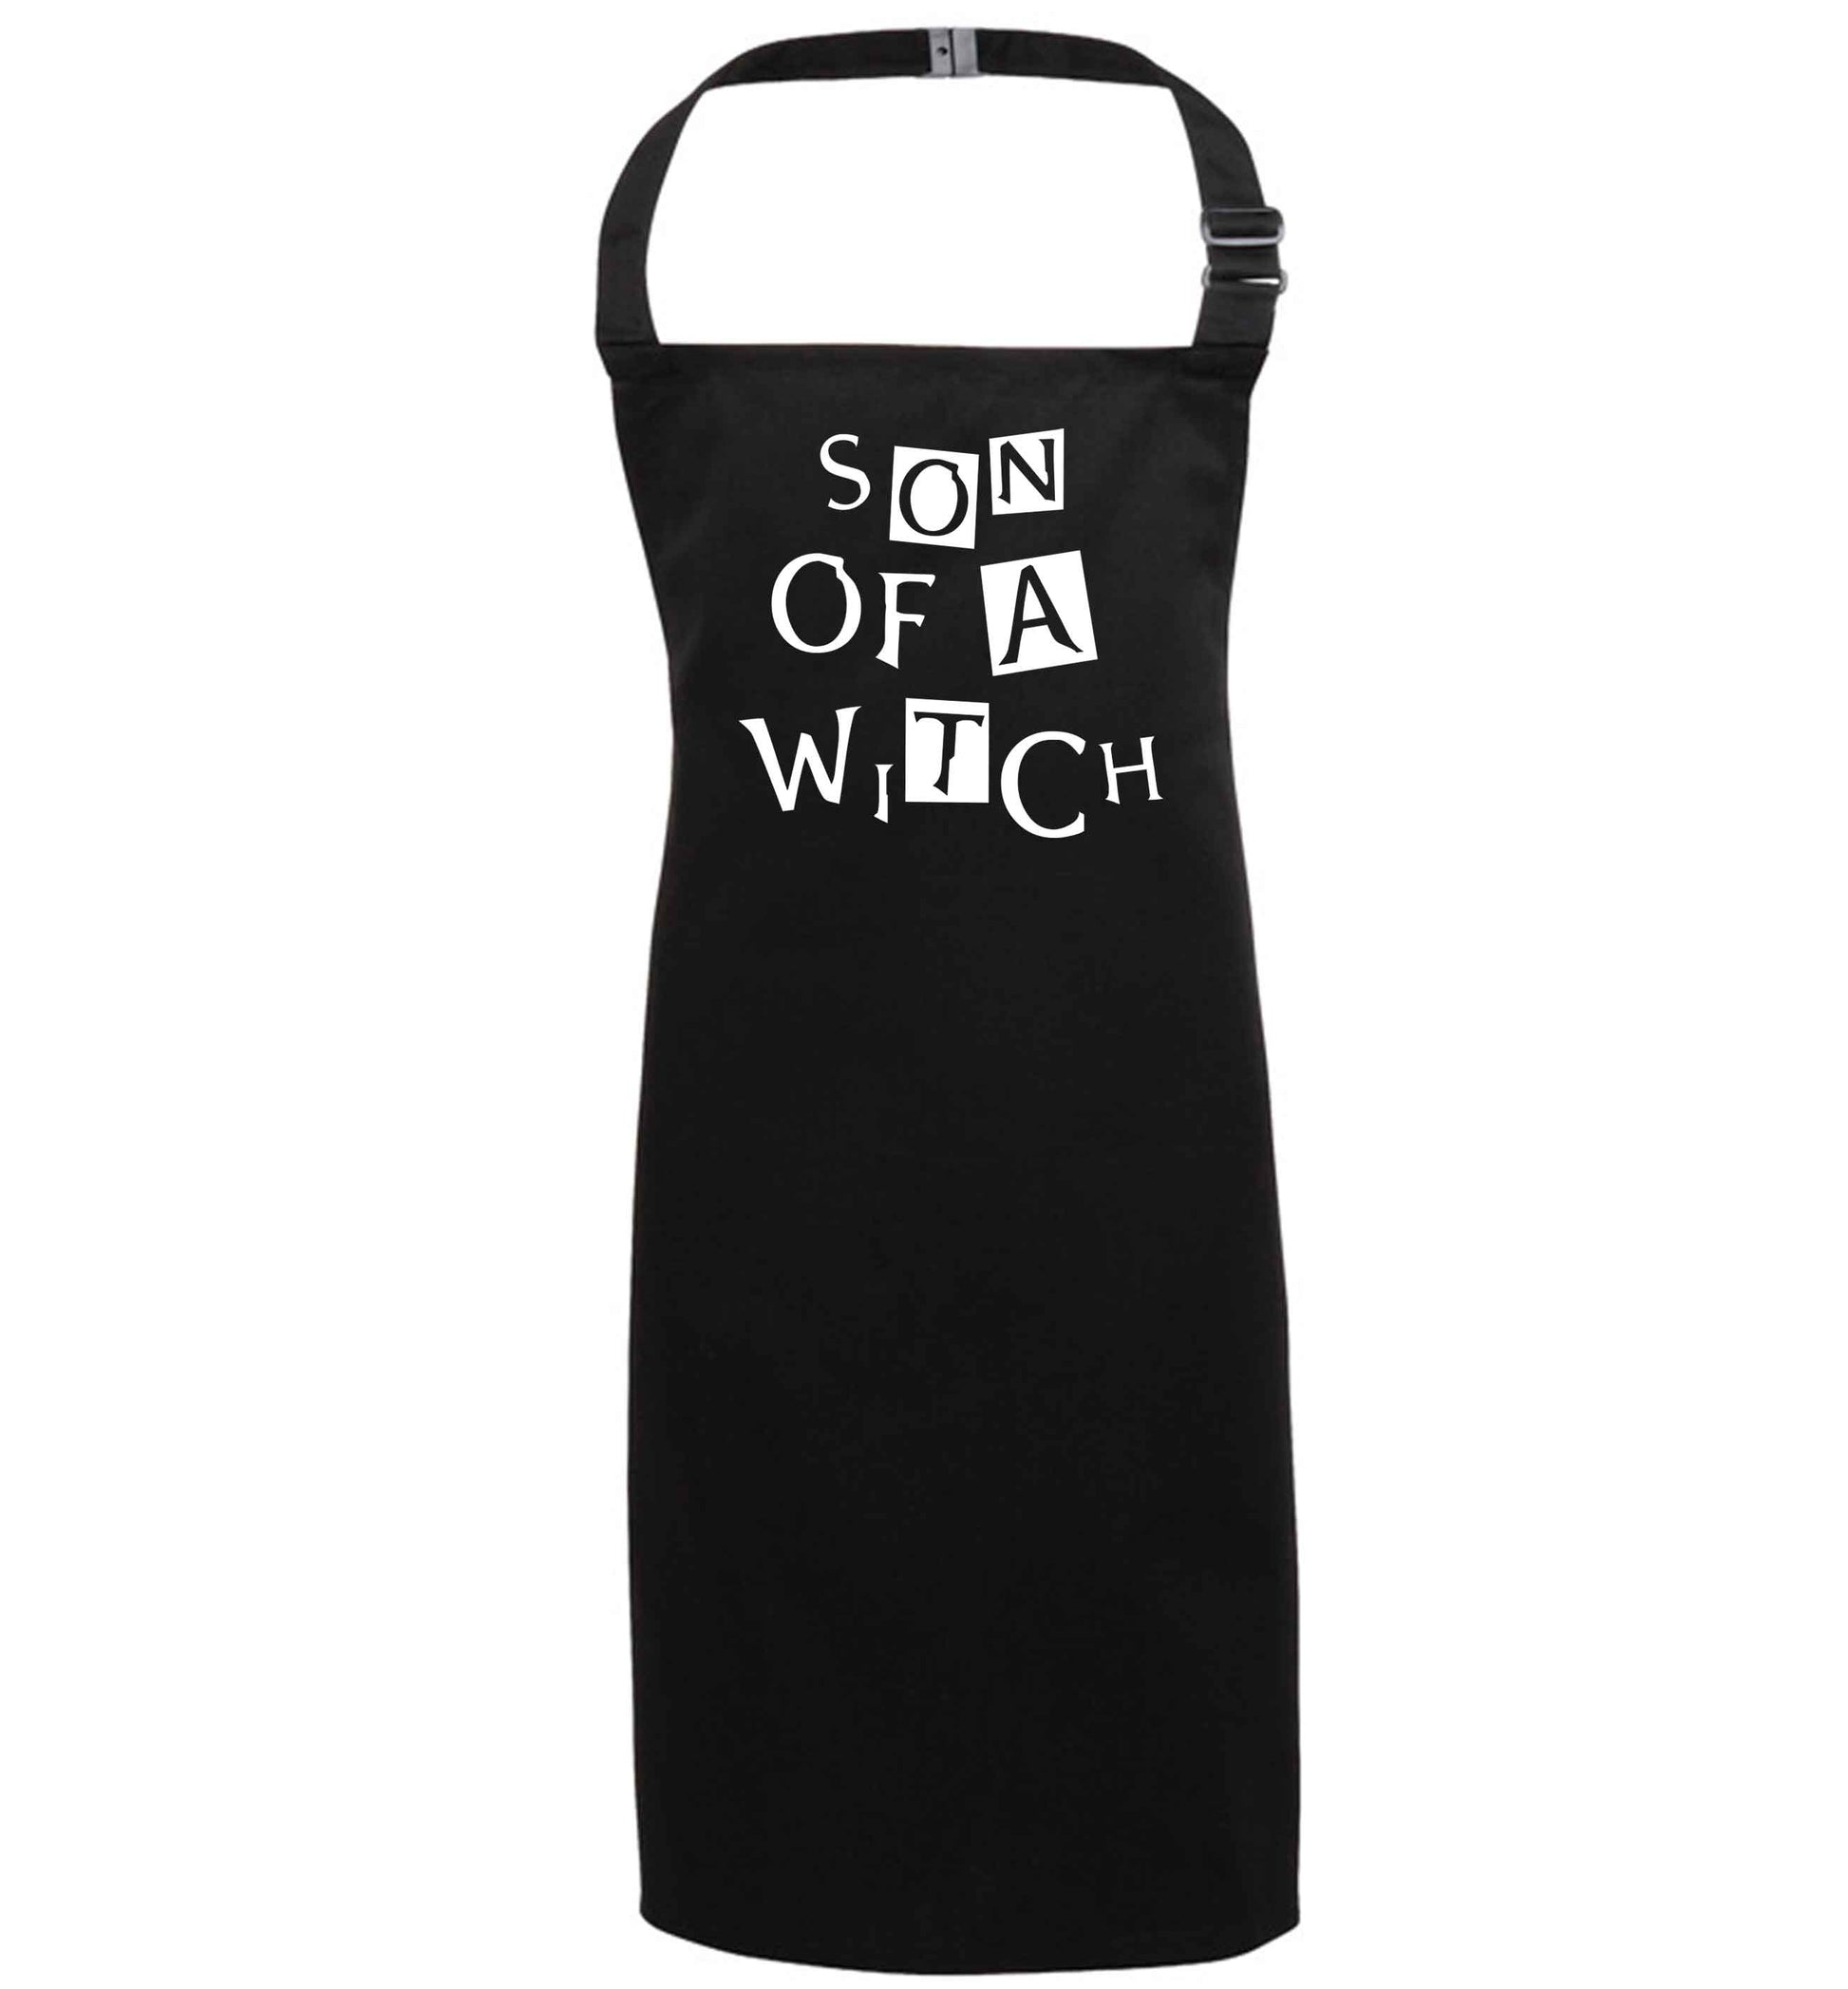 Son of a witch black apron 7-10 years